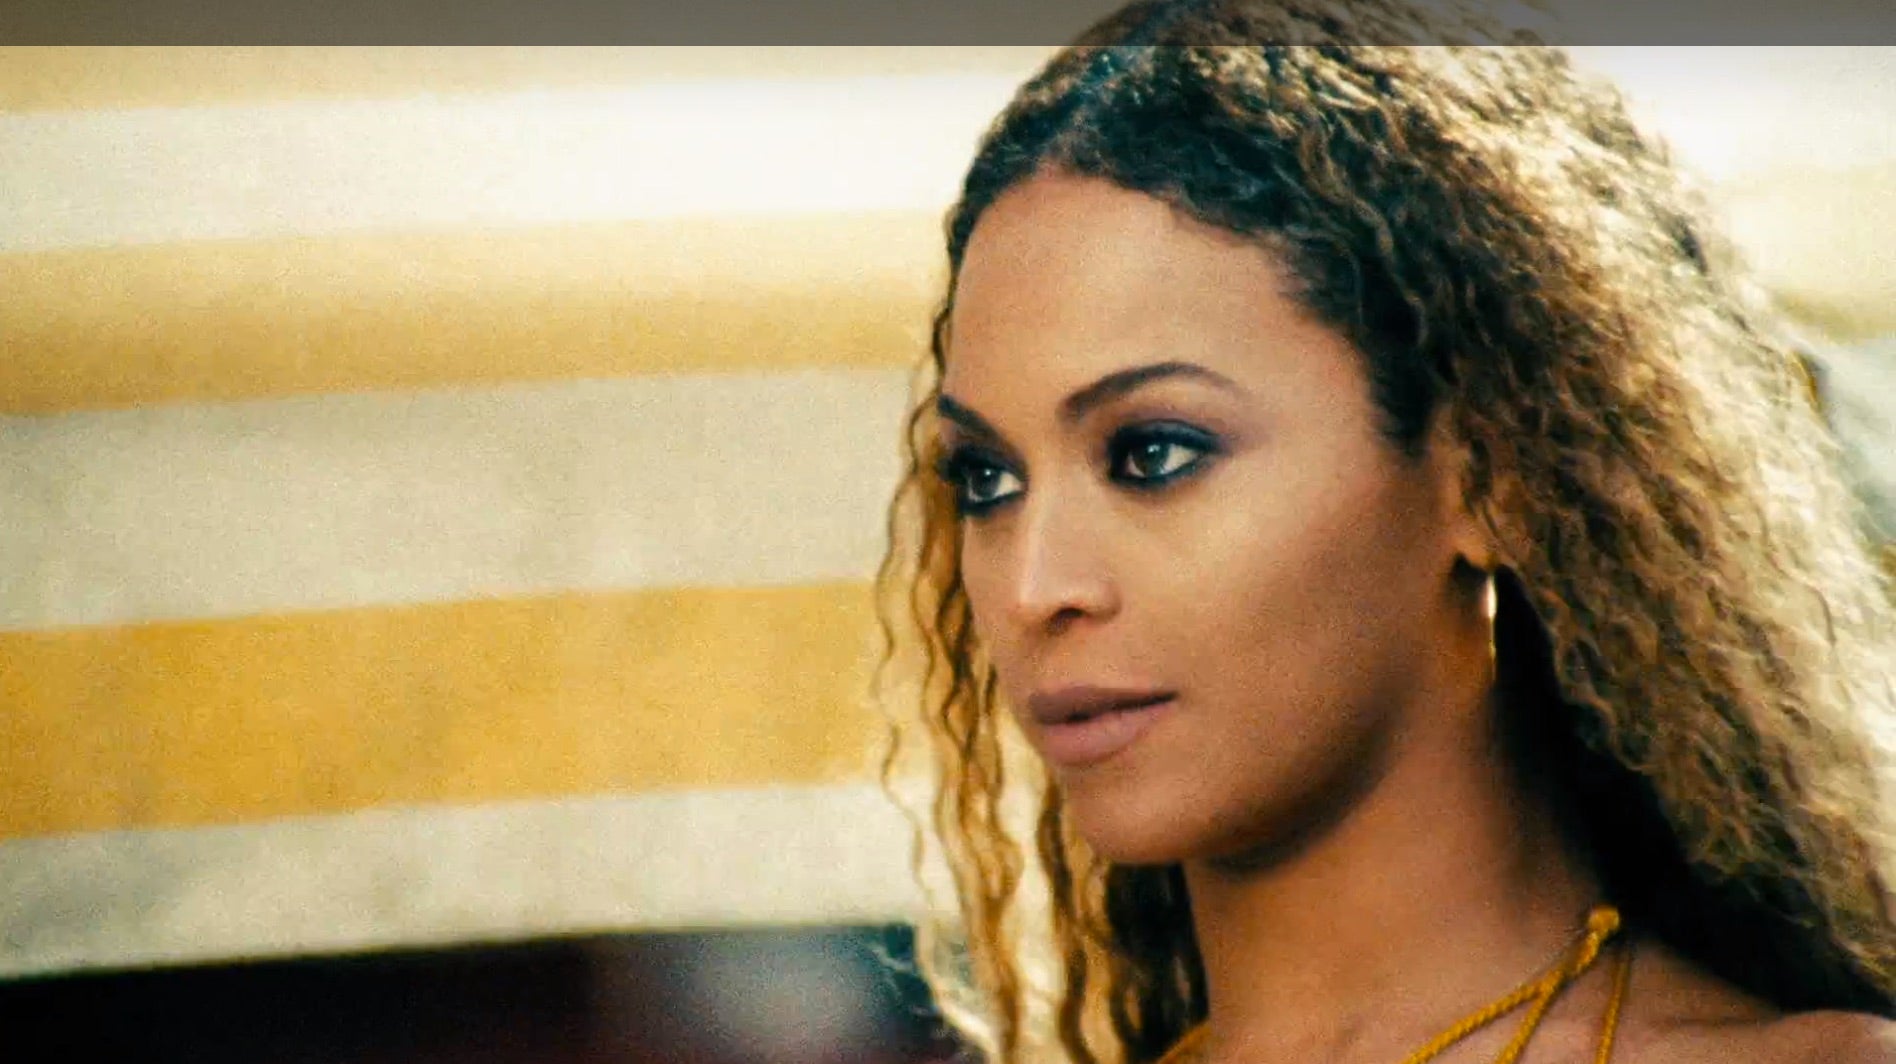 HBO Will Submit Beyoncé's 'Lemonade' for Emmy Consideration
